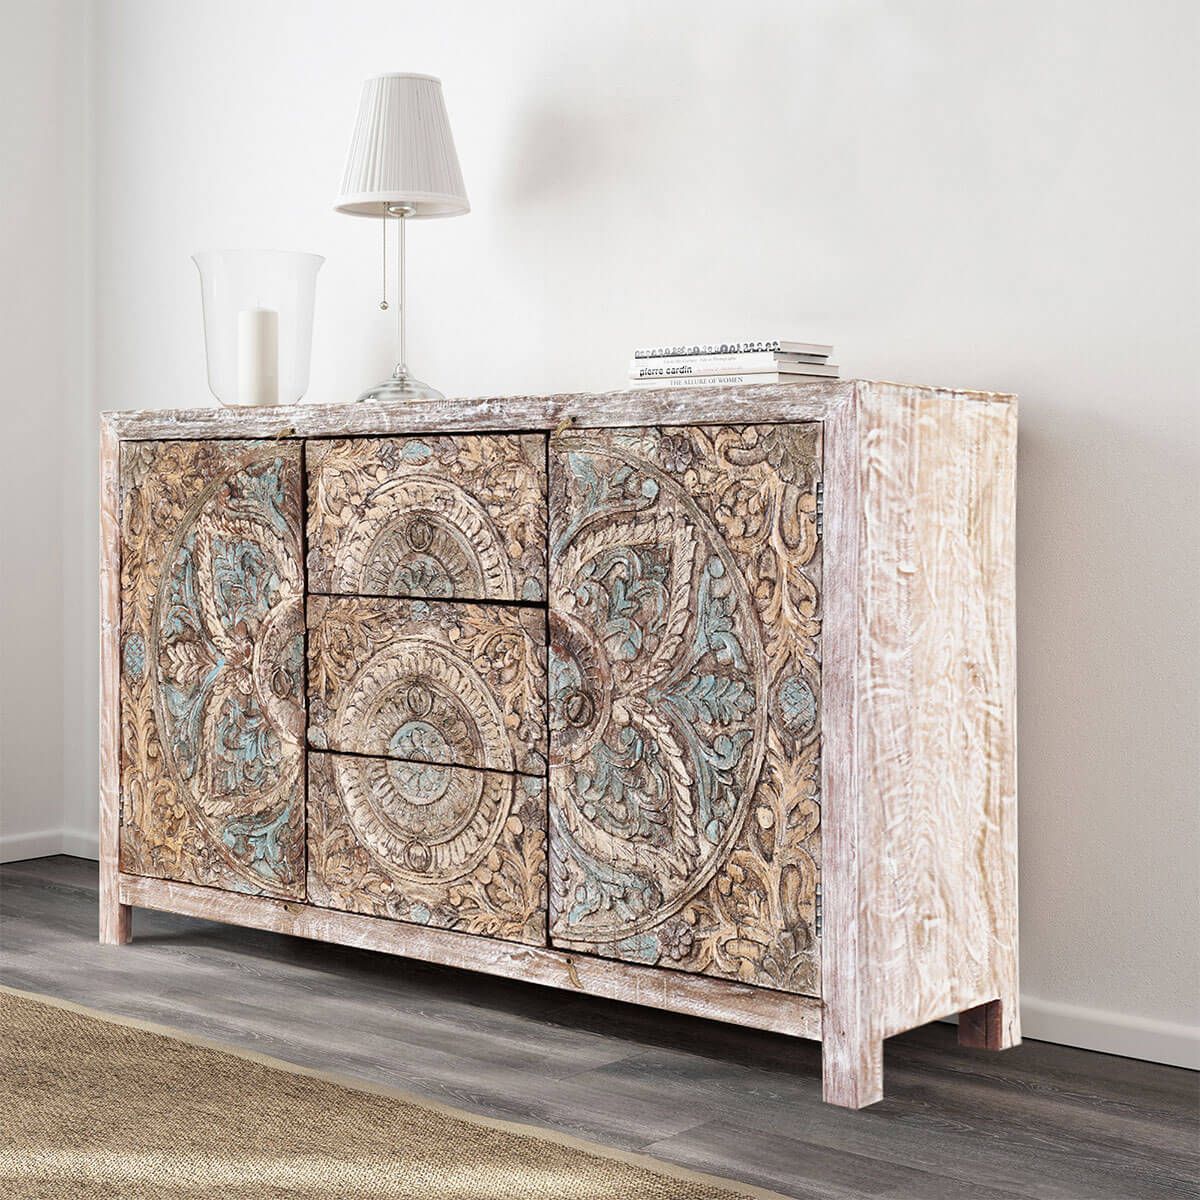 Avenal Floral Mandalas Solid Wood Hand Carved Accent Buffet Cabinet In Best And Newest Avenal Sideboards (View 5 of 20)